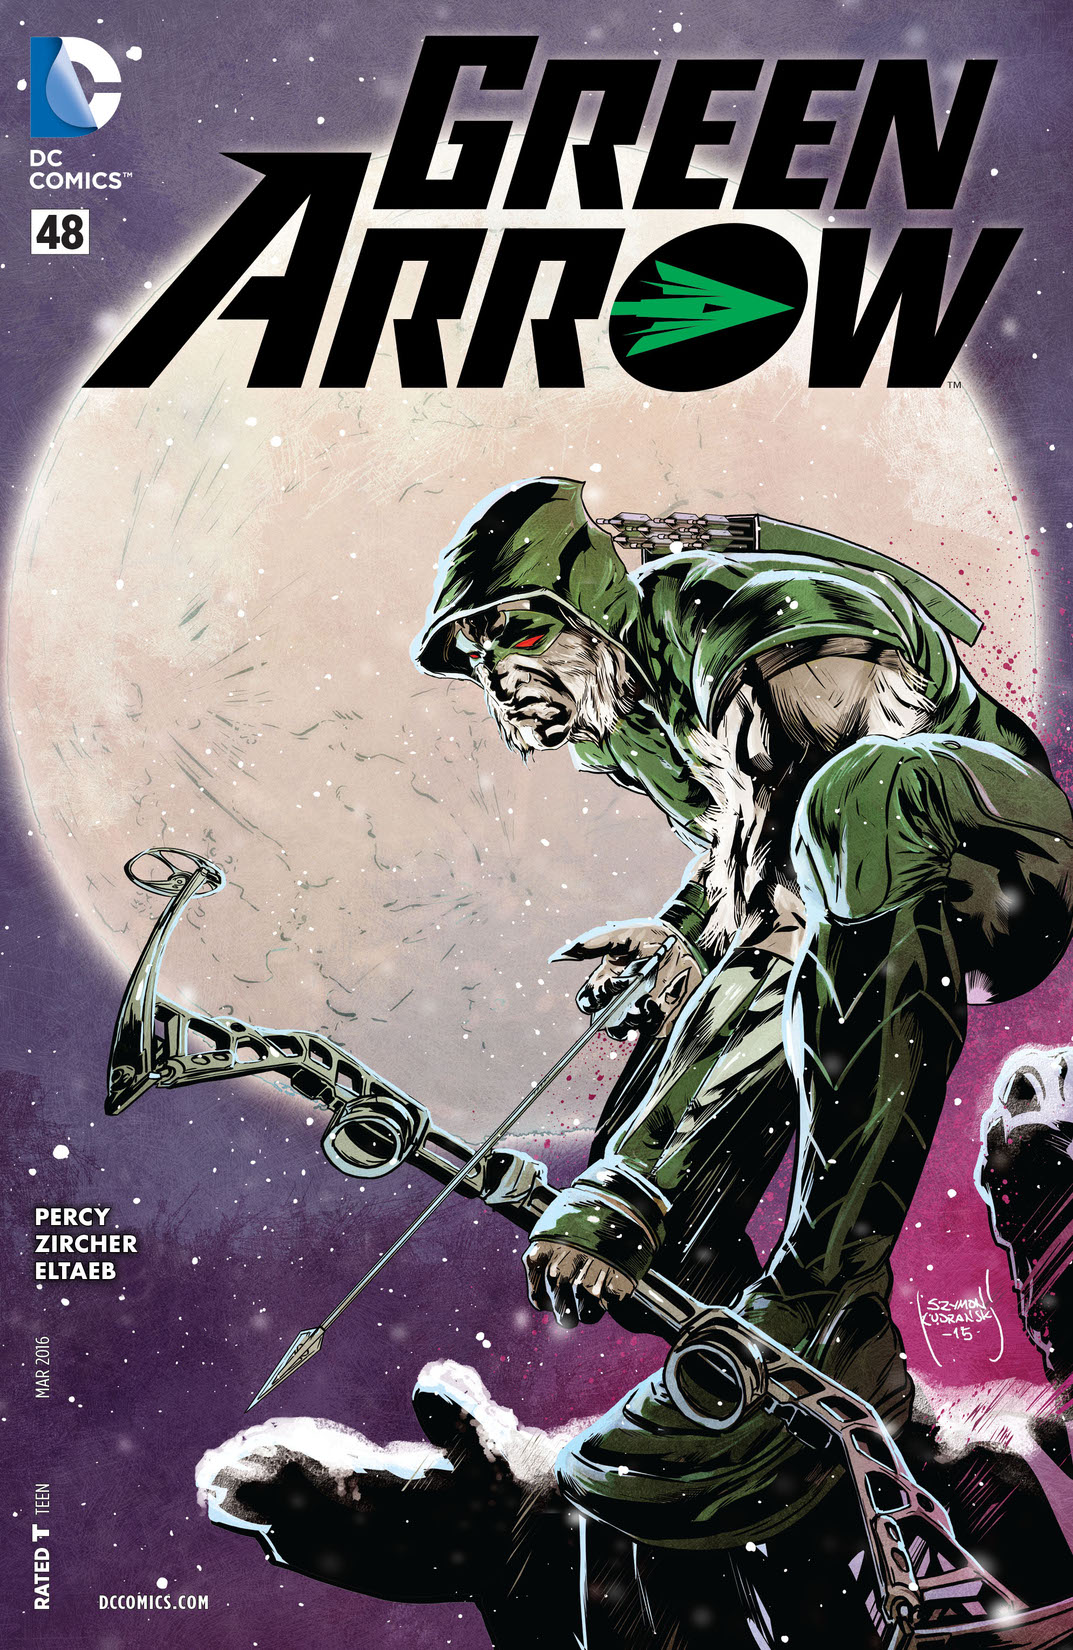 Green Arrow (2011-) #48 preview images